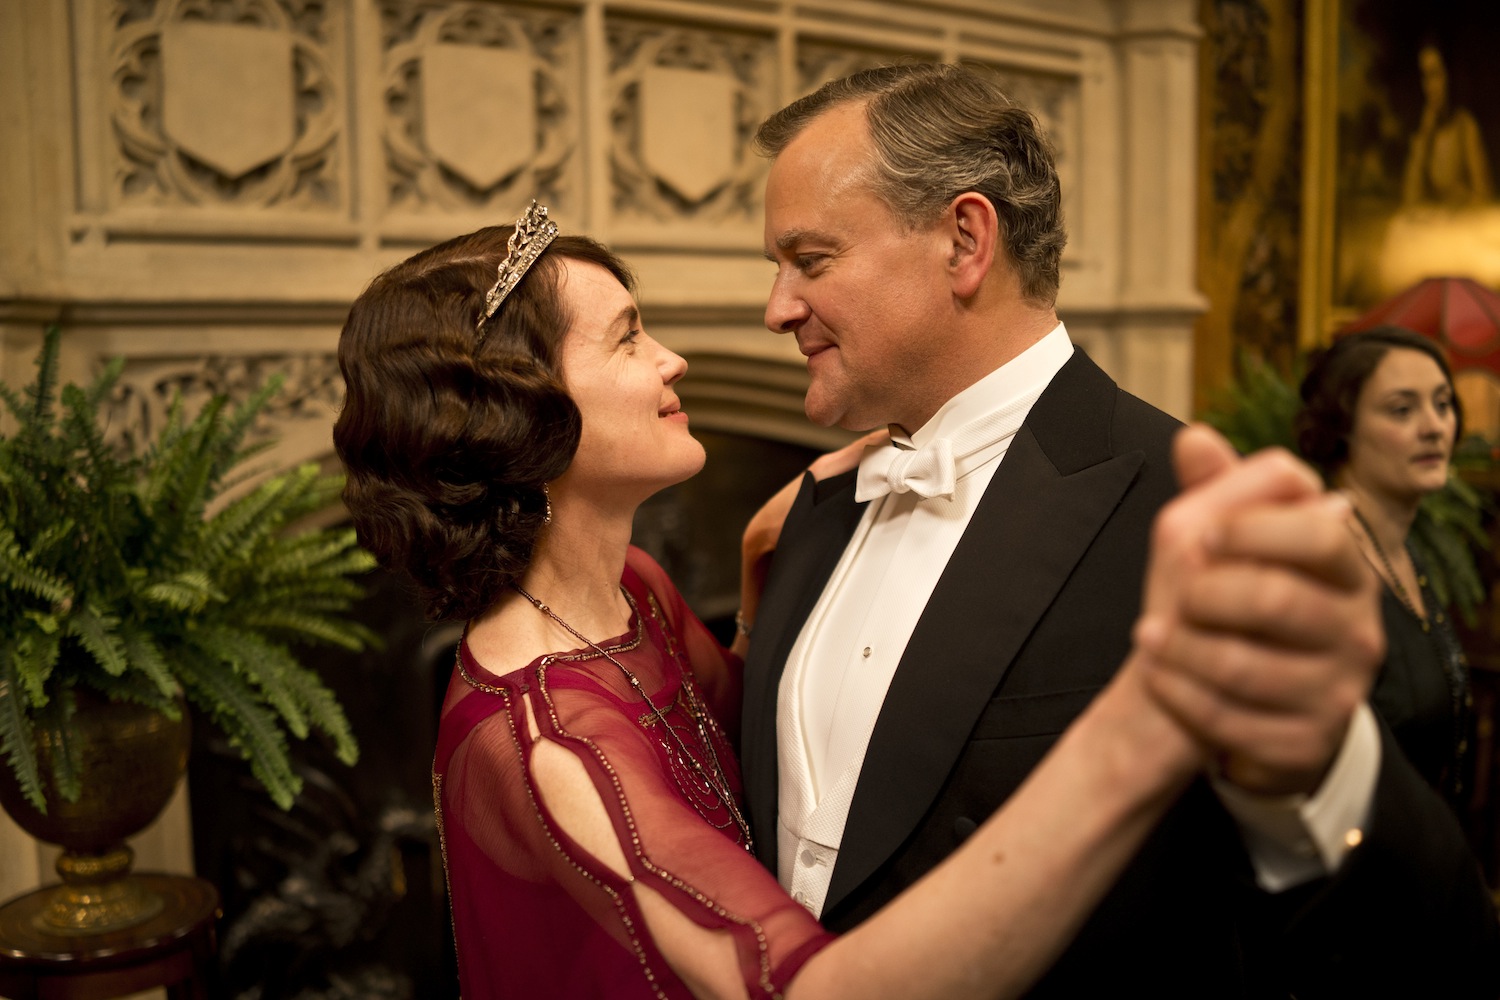 Part FiveSunday, February 2, 20149 – 10pm ET on MASTERPIECE on PBSRose’s surprise party for Robert risks scandal. Mary meets an old suitor, and Edith gets troubling news.Shown from left to right: Elizabeth McGovern as Lady Cora and Hugh Bonneville as Lord Grantham(C) Nick Briggs/Carnival Film & Television Limited 2013 for MASTERPIECEThis image may be used only in the direct promotion of MASTERPIECE CLASSIC. No other rights are granted. All rights are reserved. Editorial use only. USE ON THIRD PARTY SITES SUCH AS FACEBOOK AND TWITTER IS NOT ALLOWED.